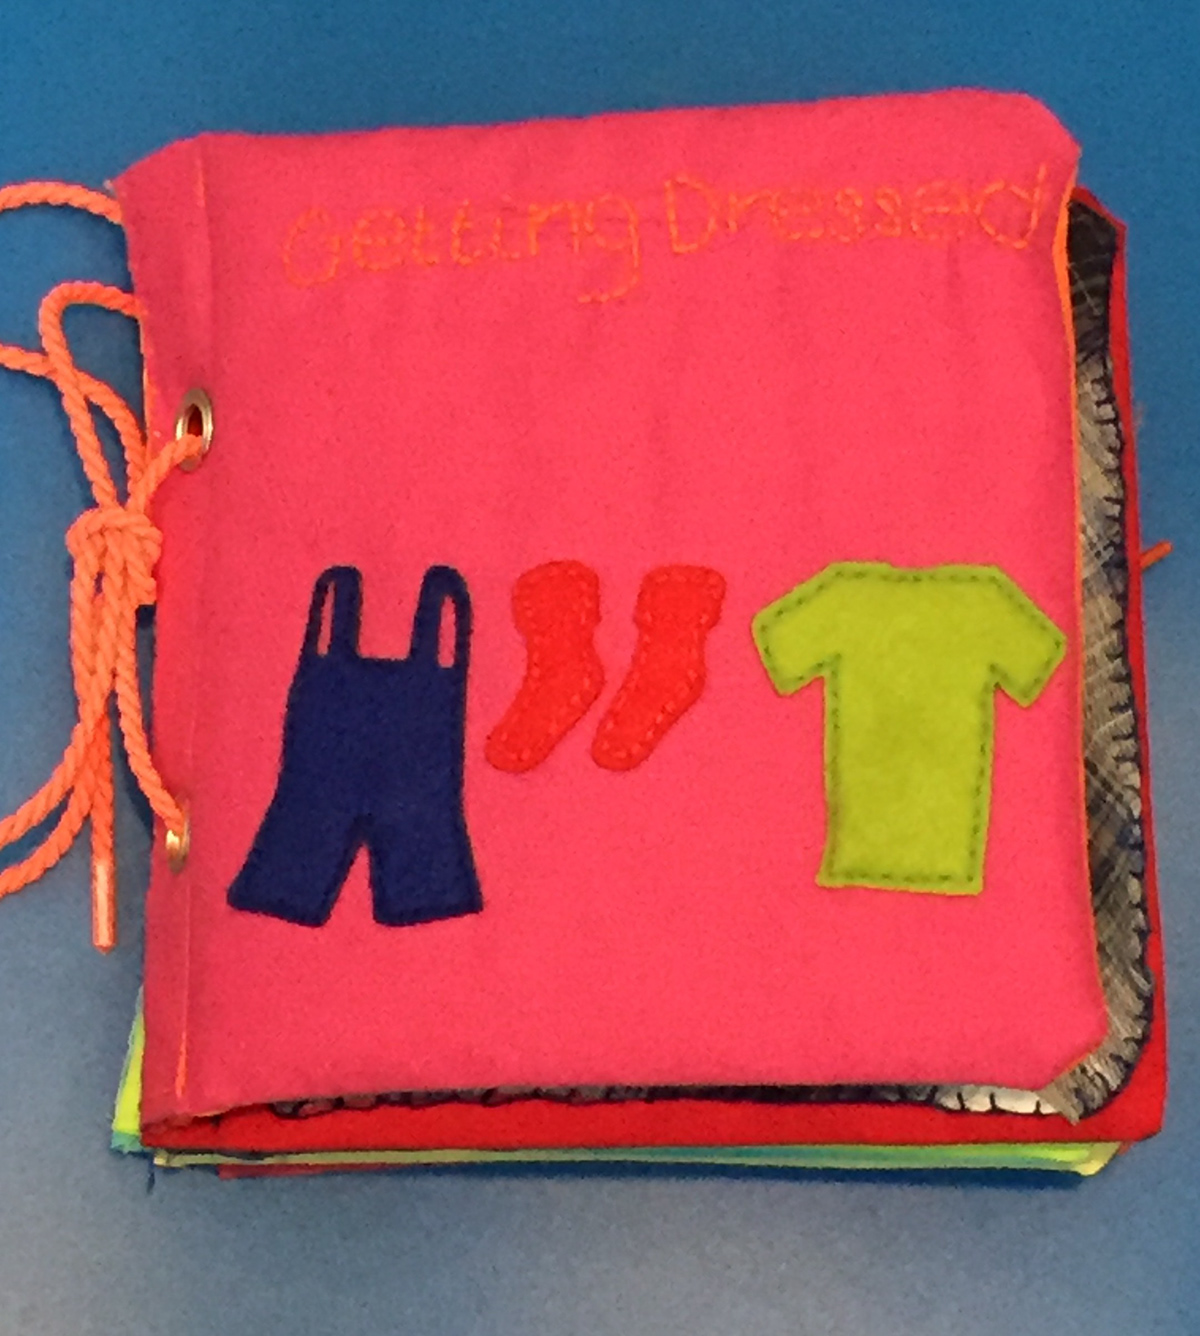 tactile children's book fastenings sewing techniques fabrics